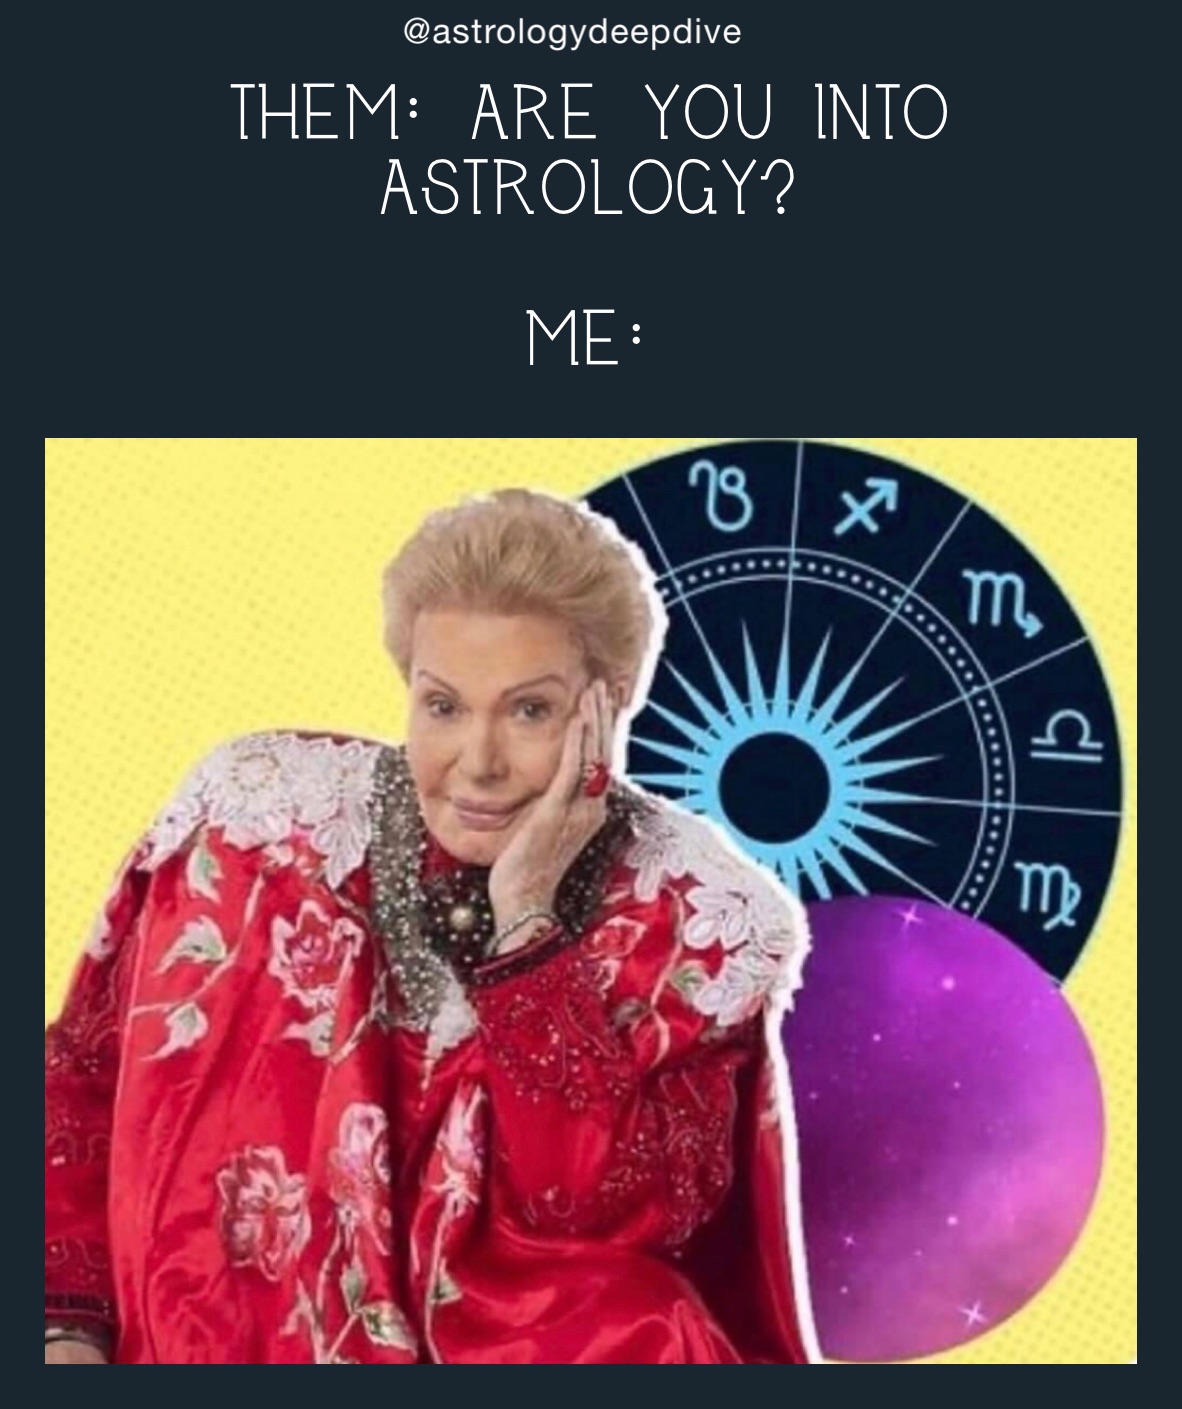 them: are you into astrology?

me: